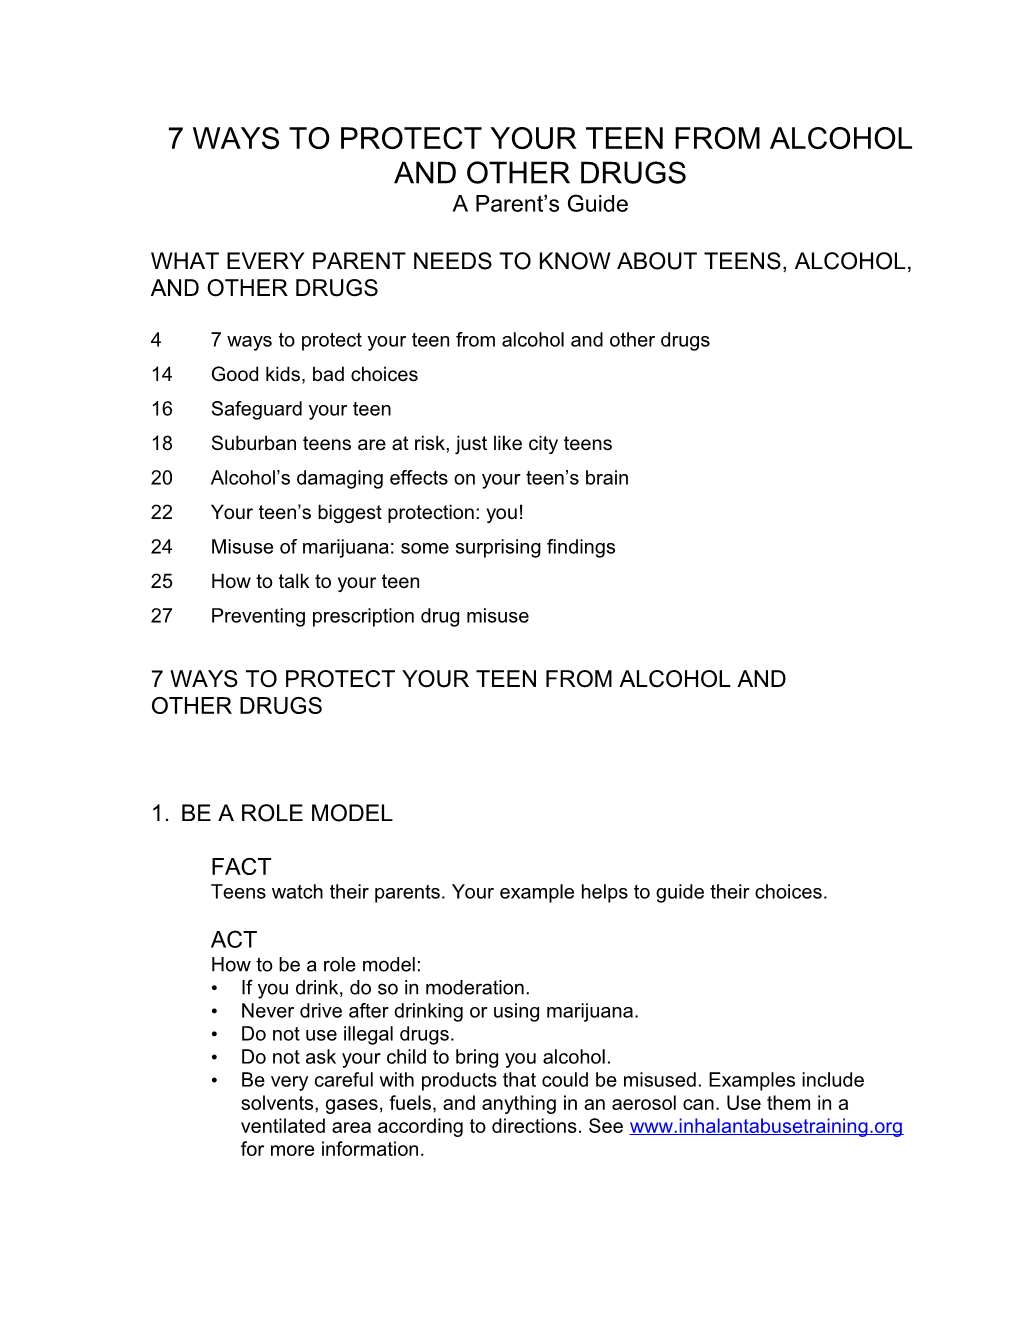 7 Ways to Protect Your Teen from Alcohol and Other Drugs